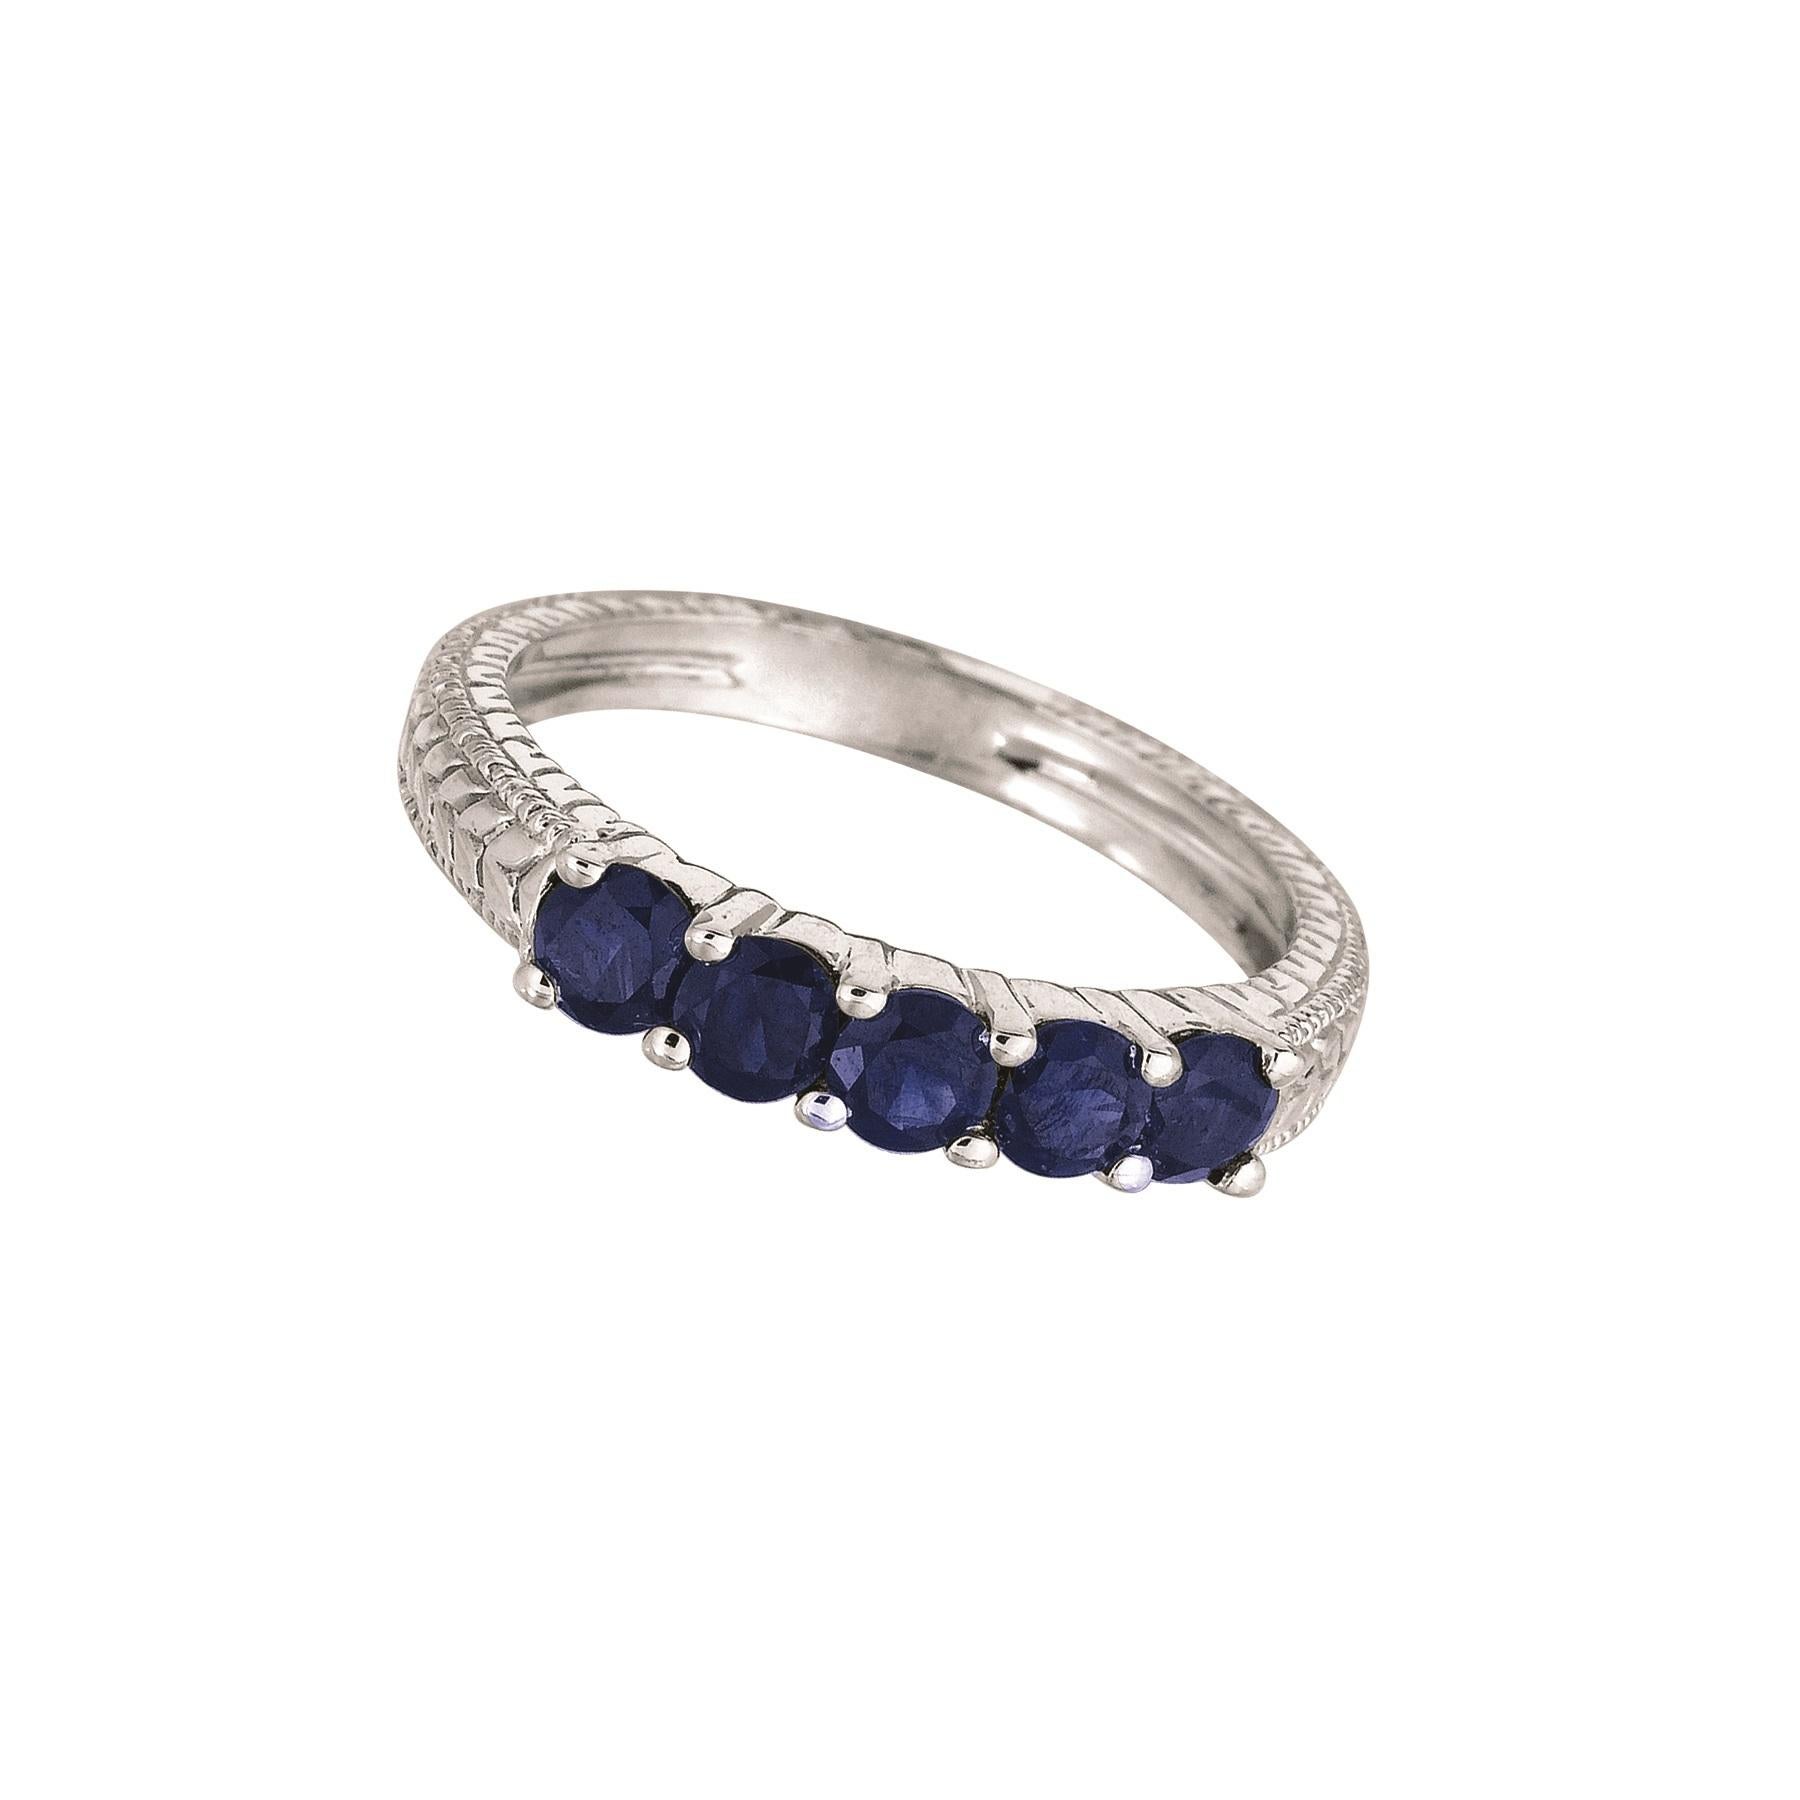 0.75 Carat Natural Sapphire 5 Stone Ring Band 14K White Gold

100% Natural Sapphires
0.75CTW
Blue
SI
14K White Gold Prong style, 3.60 grams
4 mm in width
Size 7
5 stones

R6417W75S

ALL OUR ITEMS ARE AVAILABLE TO BE ORDERED IN 14K WHITE, ROSE OR